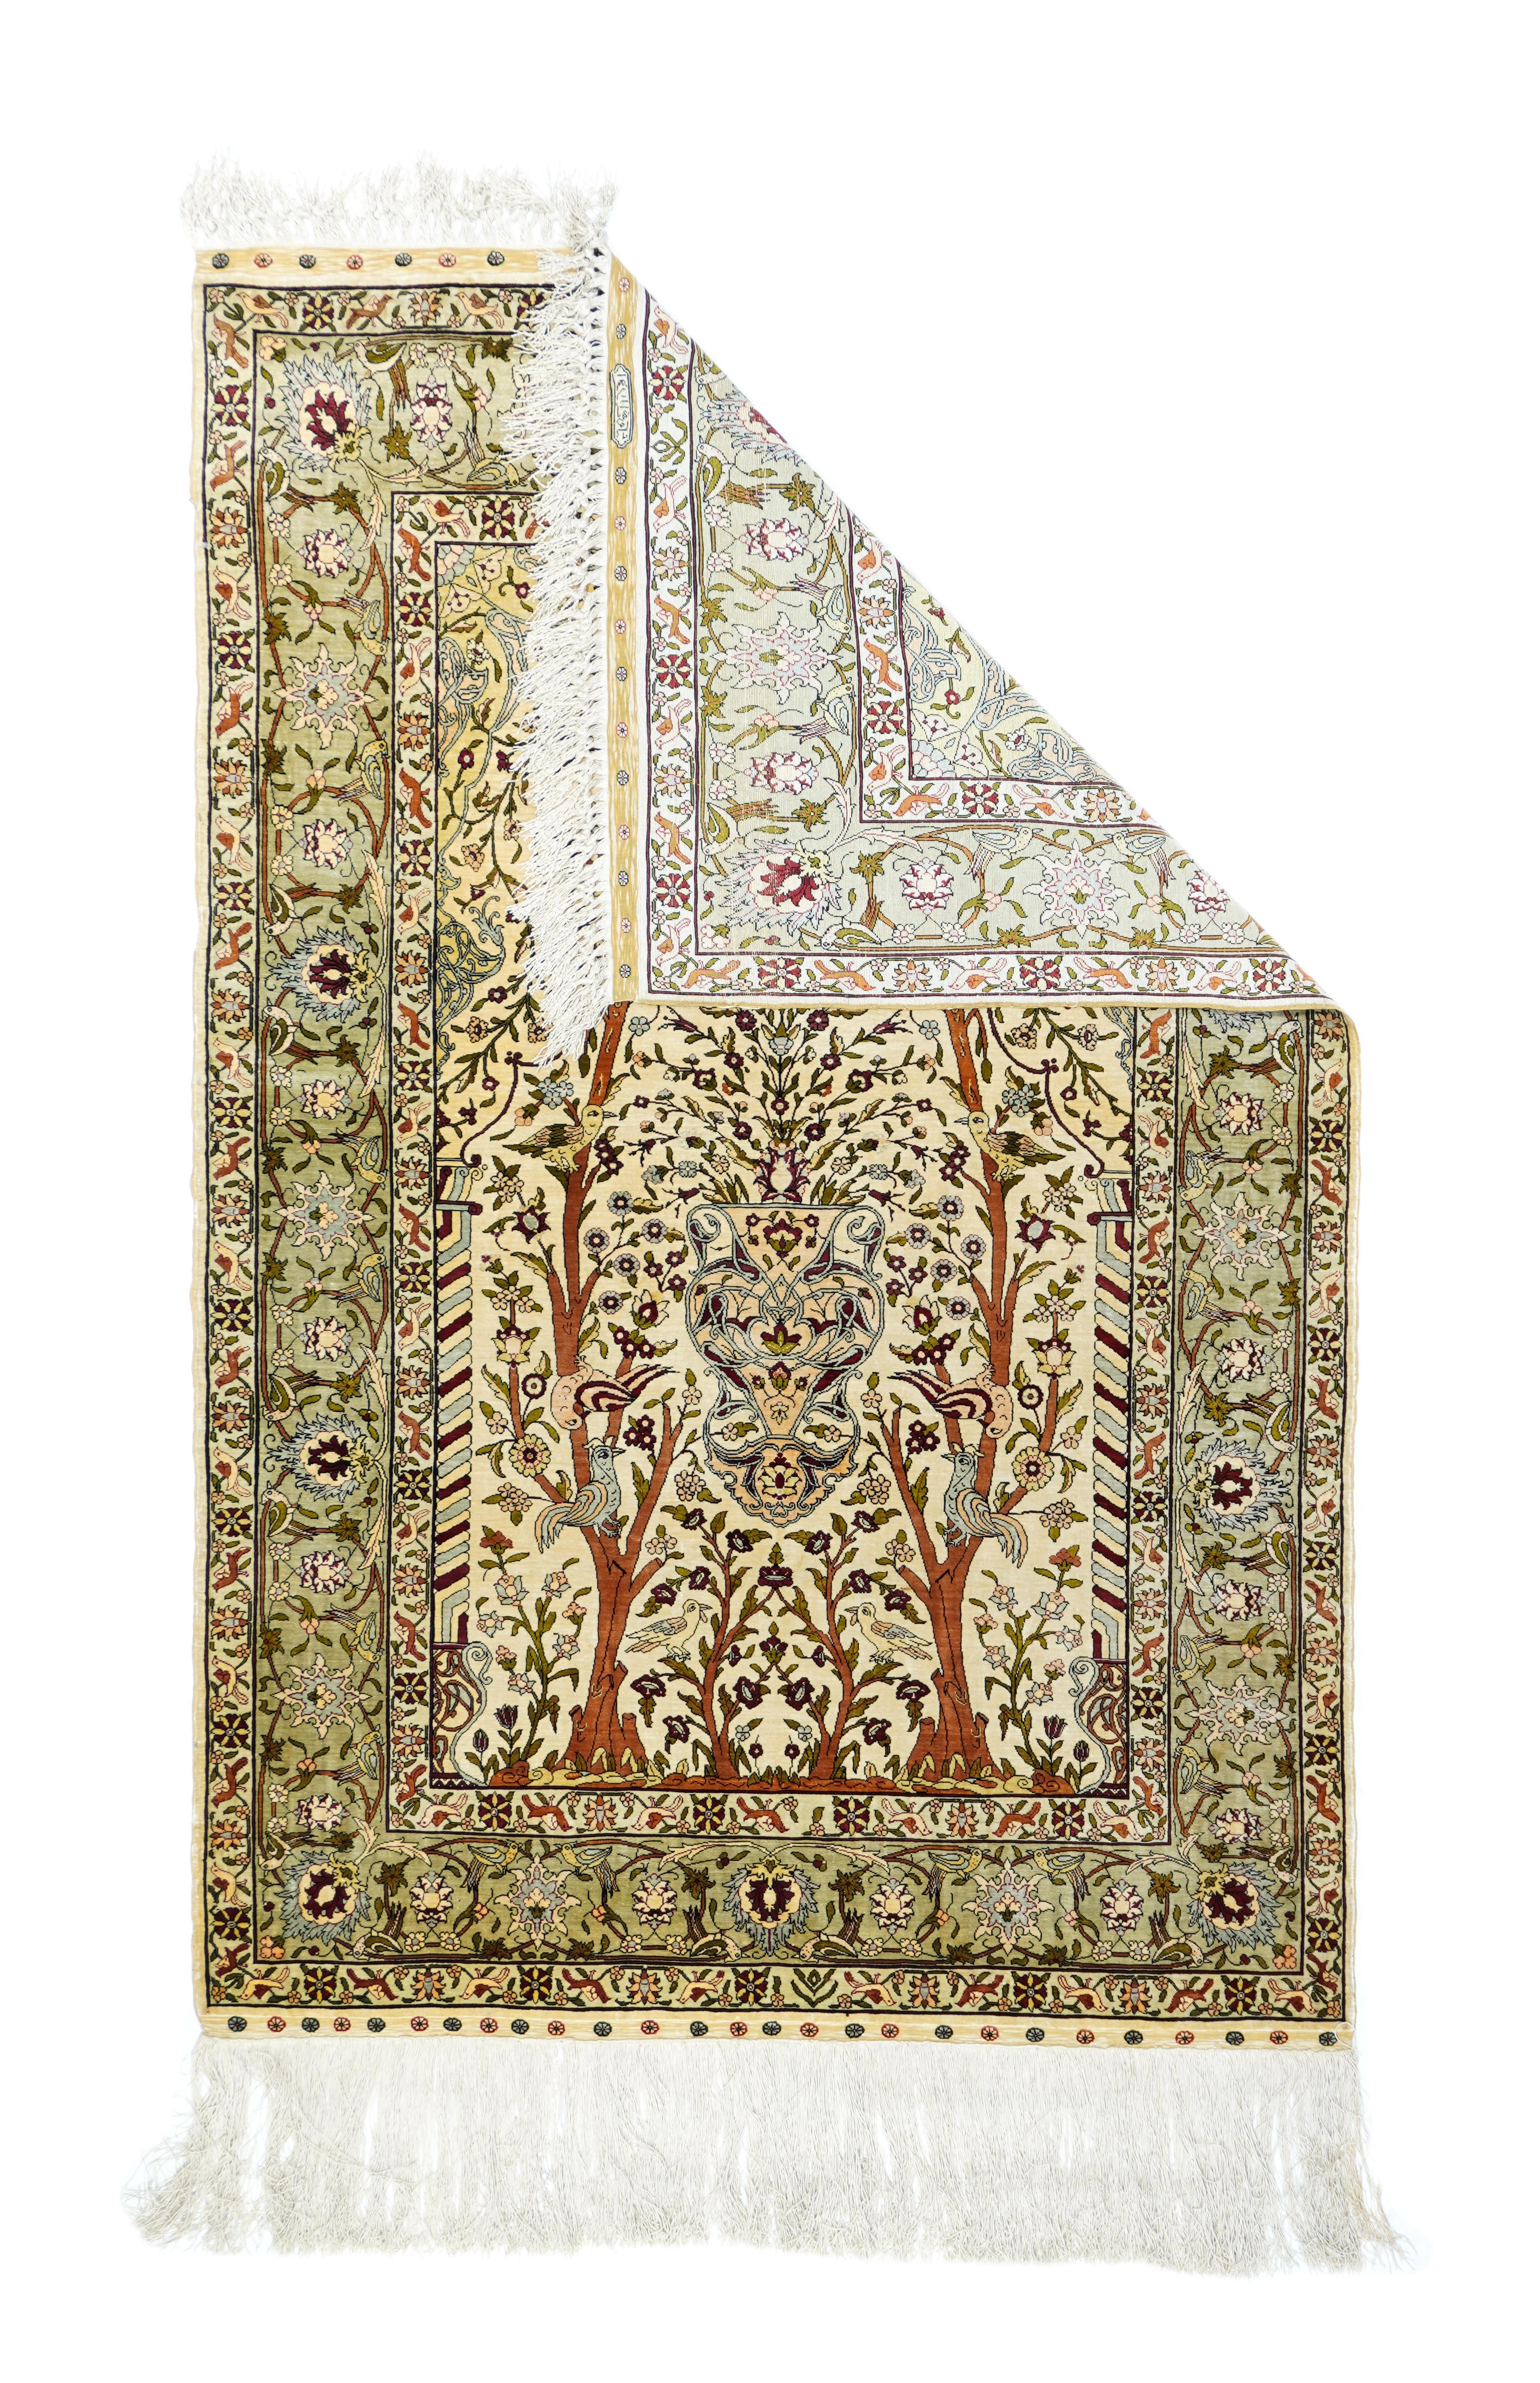 This all silk, extremely fine urban, Turkish wall-hanging shows a cream nichewith a central vase flanked by two full-height trees harboring small birds. Diagonally colour-ribbed colonettes at the sudes. Light straw spandrels with vineryand forked